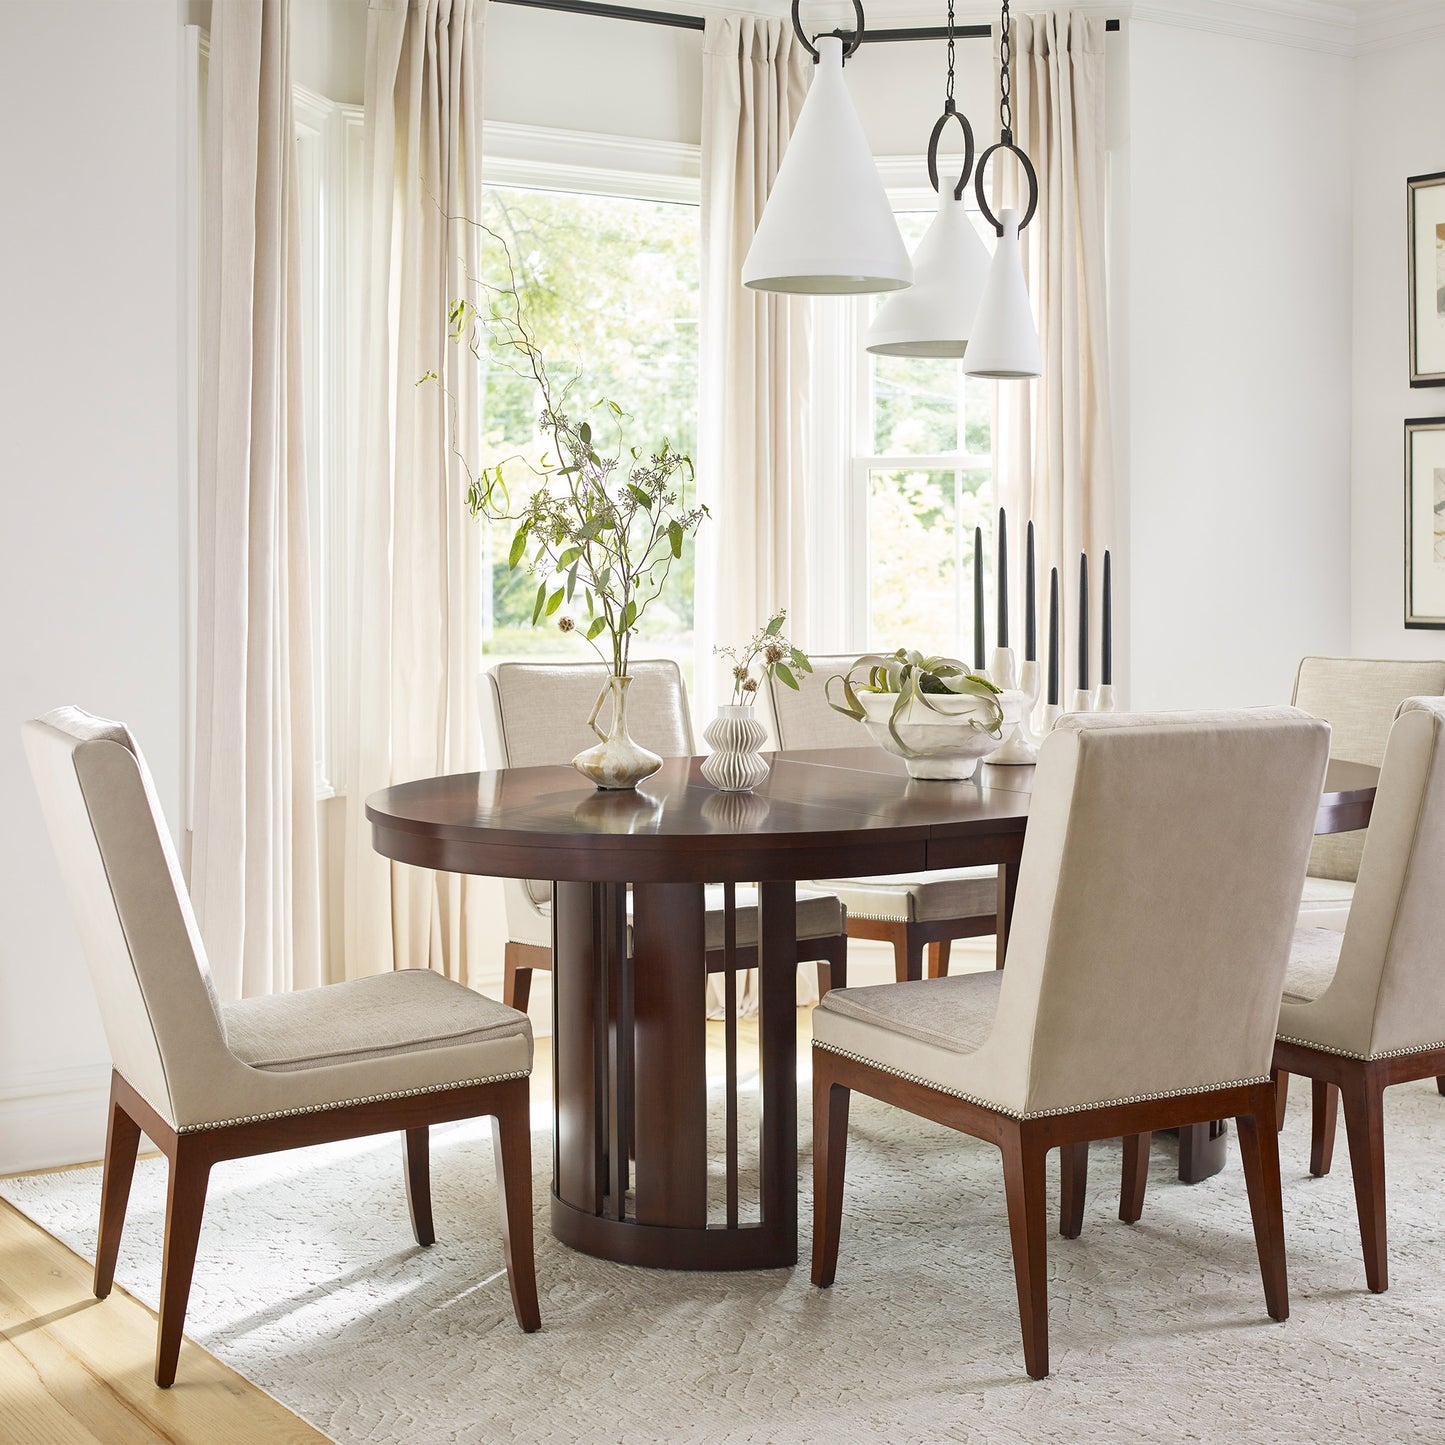 Park Slope Round Dining Table